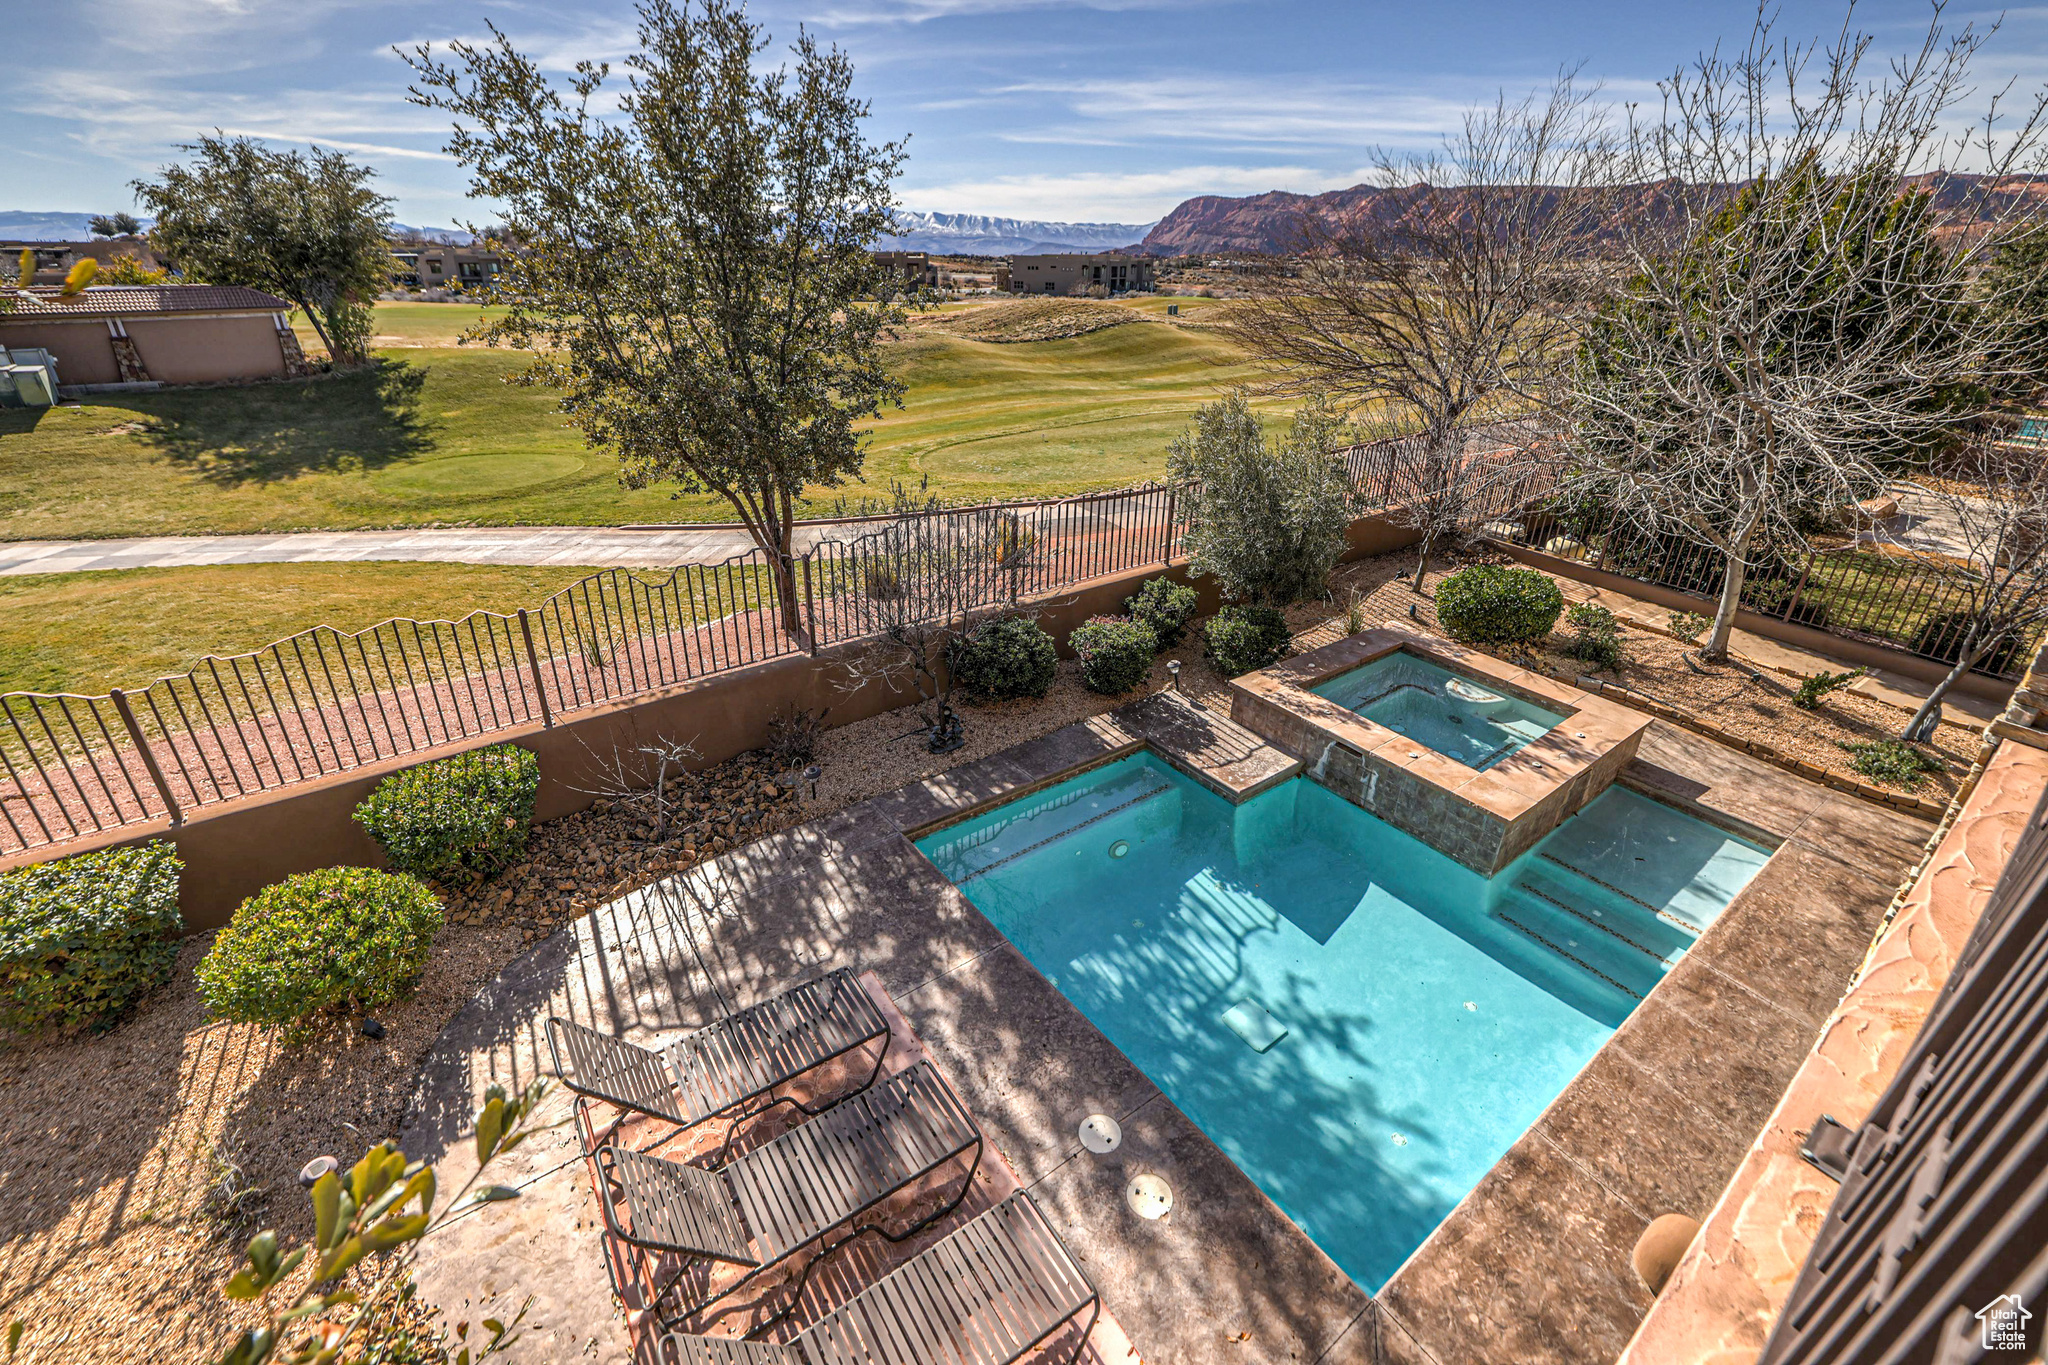 View of swimming pool featuring a mountain view, a lawn, a patio area, and an in ground hot tub